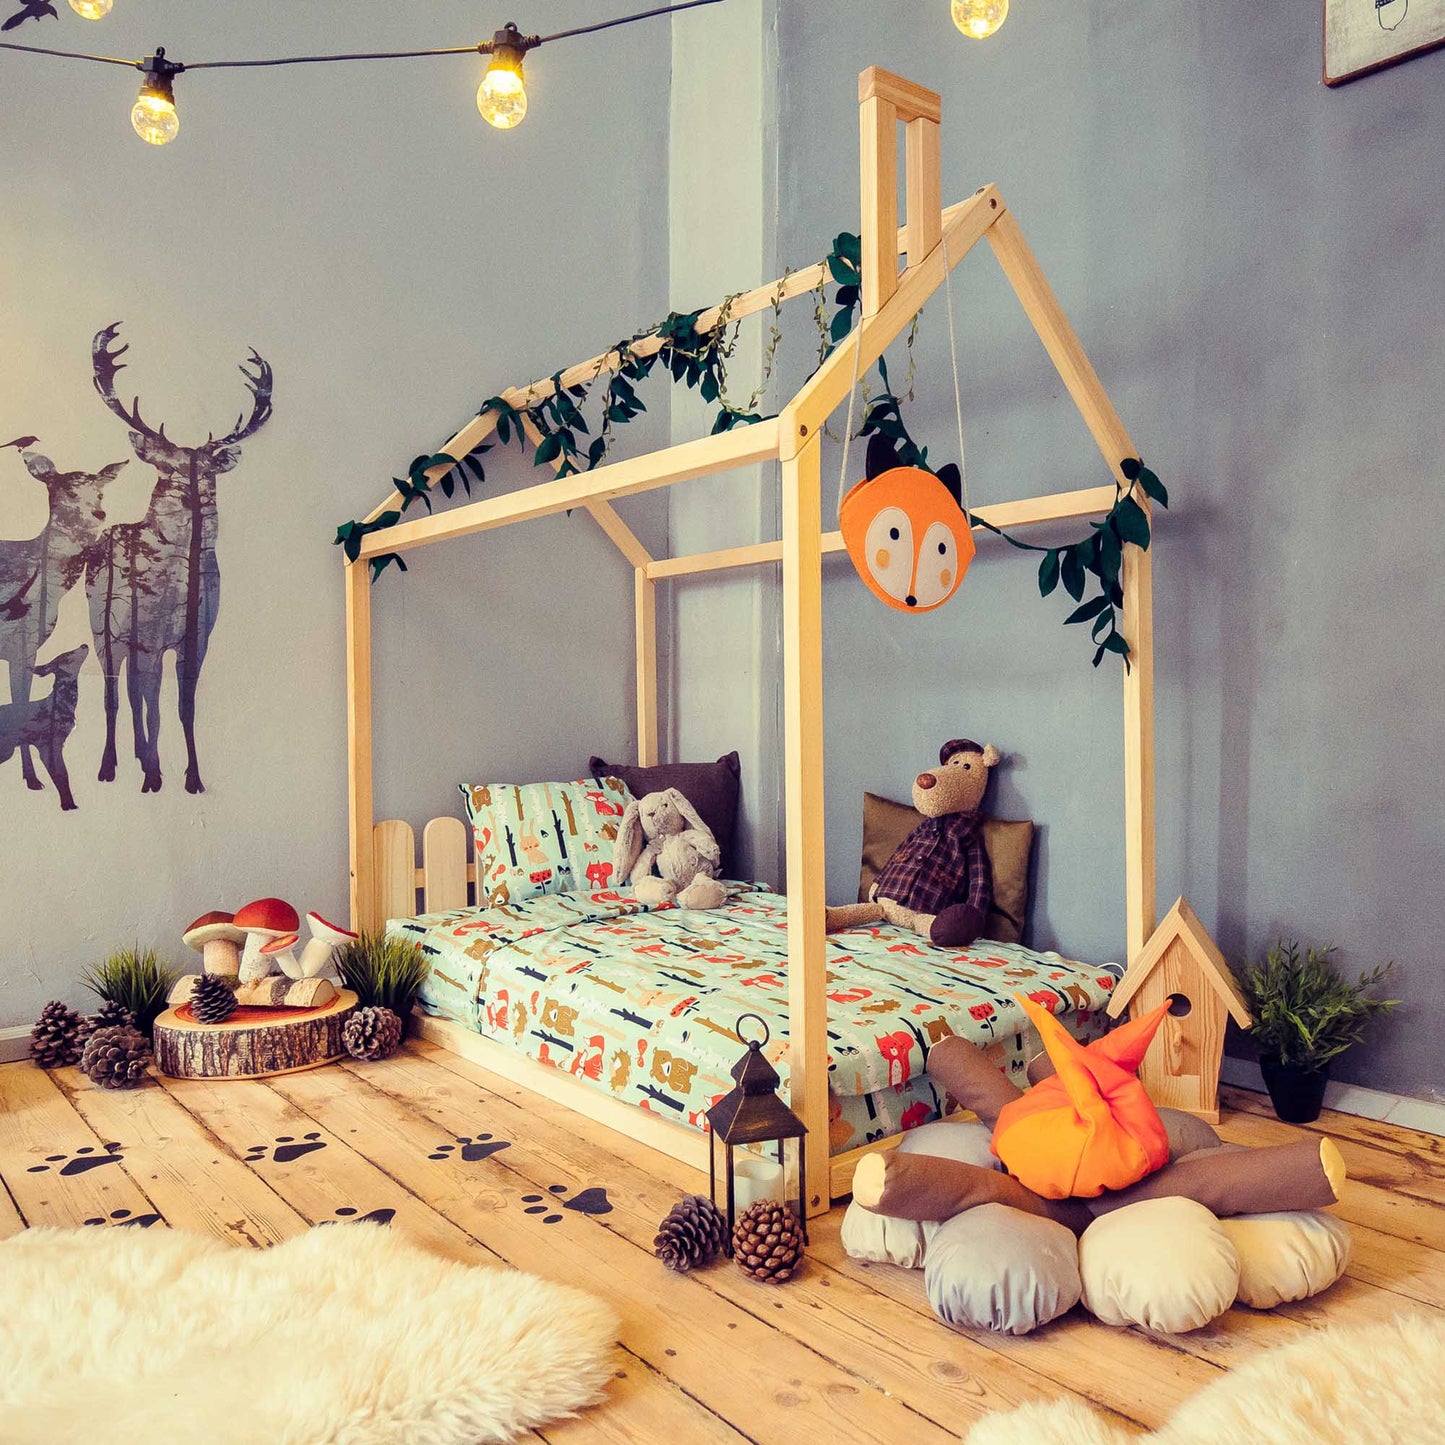 A children's room with a wooden bed and stuffed animals. The wooden bed in this children's room is a Kids' house-frame bed with a picket fence headboard, providing a low platform for toddlers and creating a cozy environment.